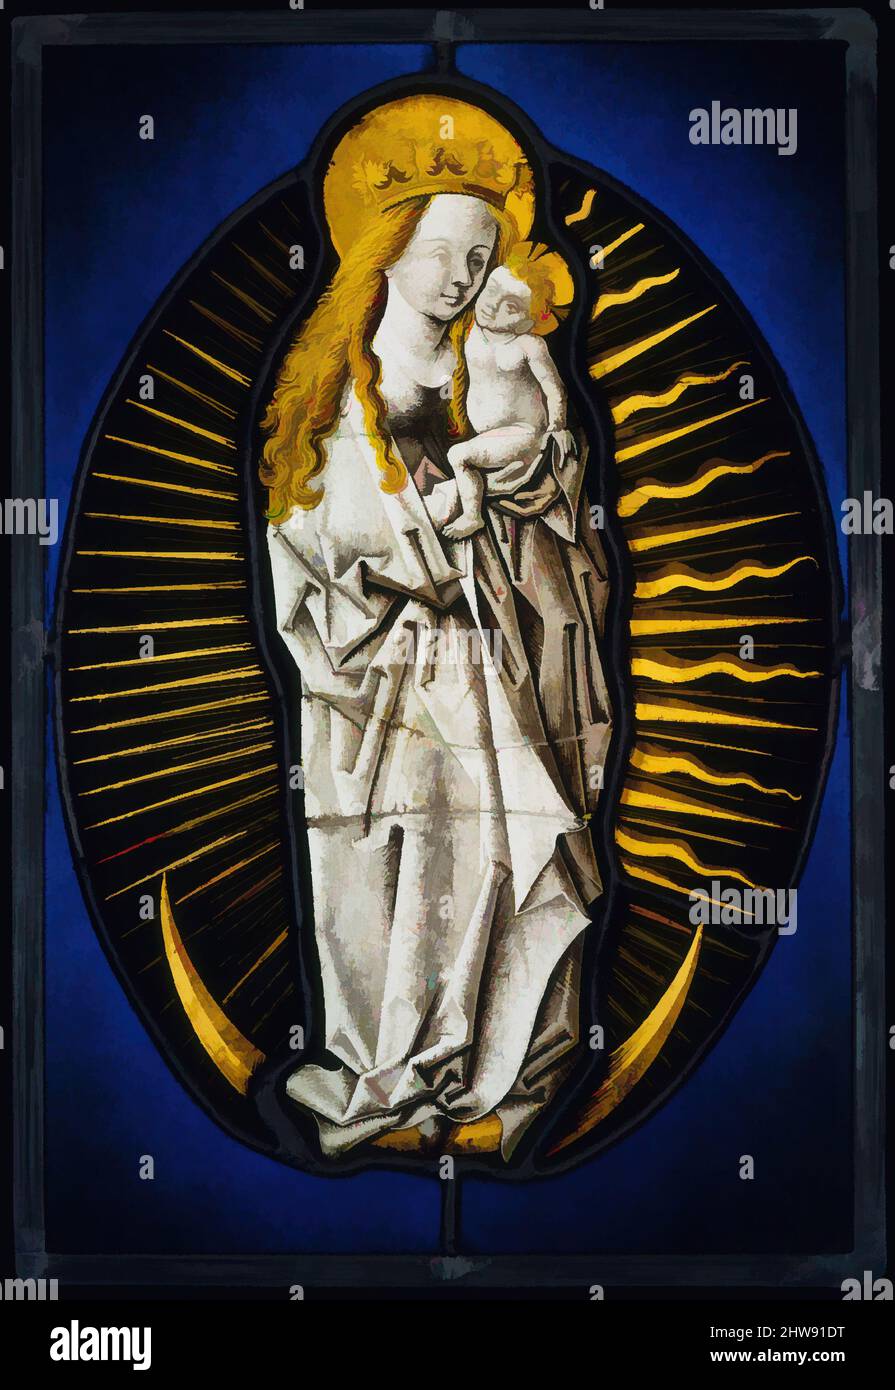 Art inspired by Virgin of the Apocalypse, ca. 1480–90, Made in Middle Rhine, Germany, German, Colorless glass, silver stain, and vitreous paint, Overall: 13 7/8 x 9 5/8in. (35.2 x 24.4cm), Glass-Stained, Circle of the Master of the Amsterdam Cabinet (German, active ca. 1470–90), The, Classic works modernized by Artotop with a splash of modernity. Shapes, color and value, eye-catching visual impact on art. Emotions through freedom of artworks in a contemporary way. A timeless message pursuing a wildly creative new direction. Artists turning to the digital medium and creating the Artotop NFT Stock Photo